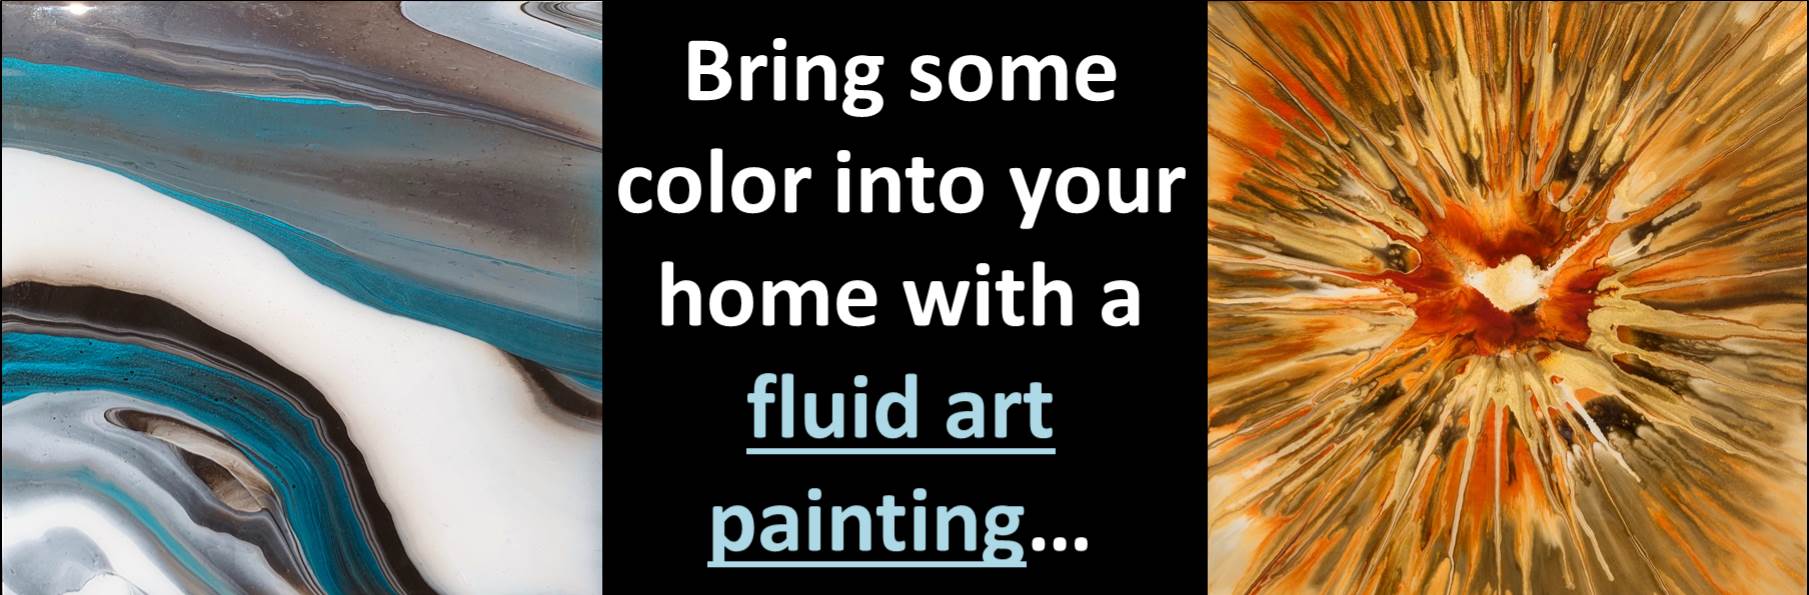 Bring some color into your home with a fluid art painting...